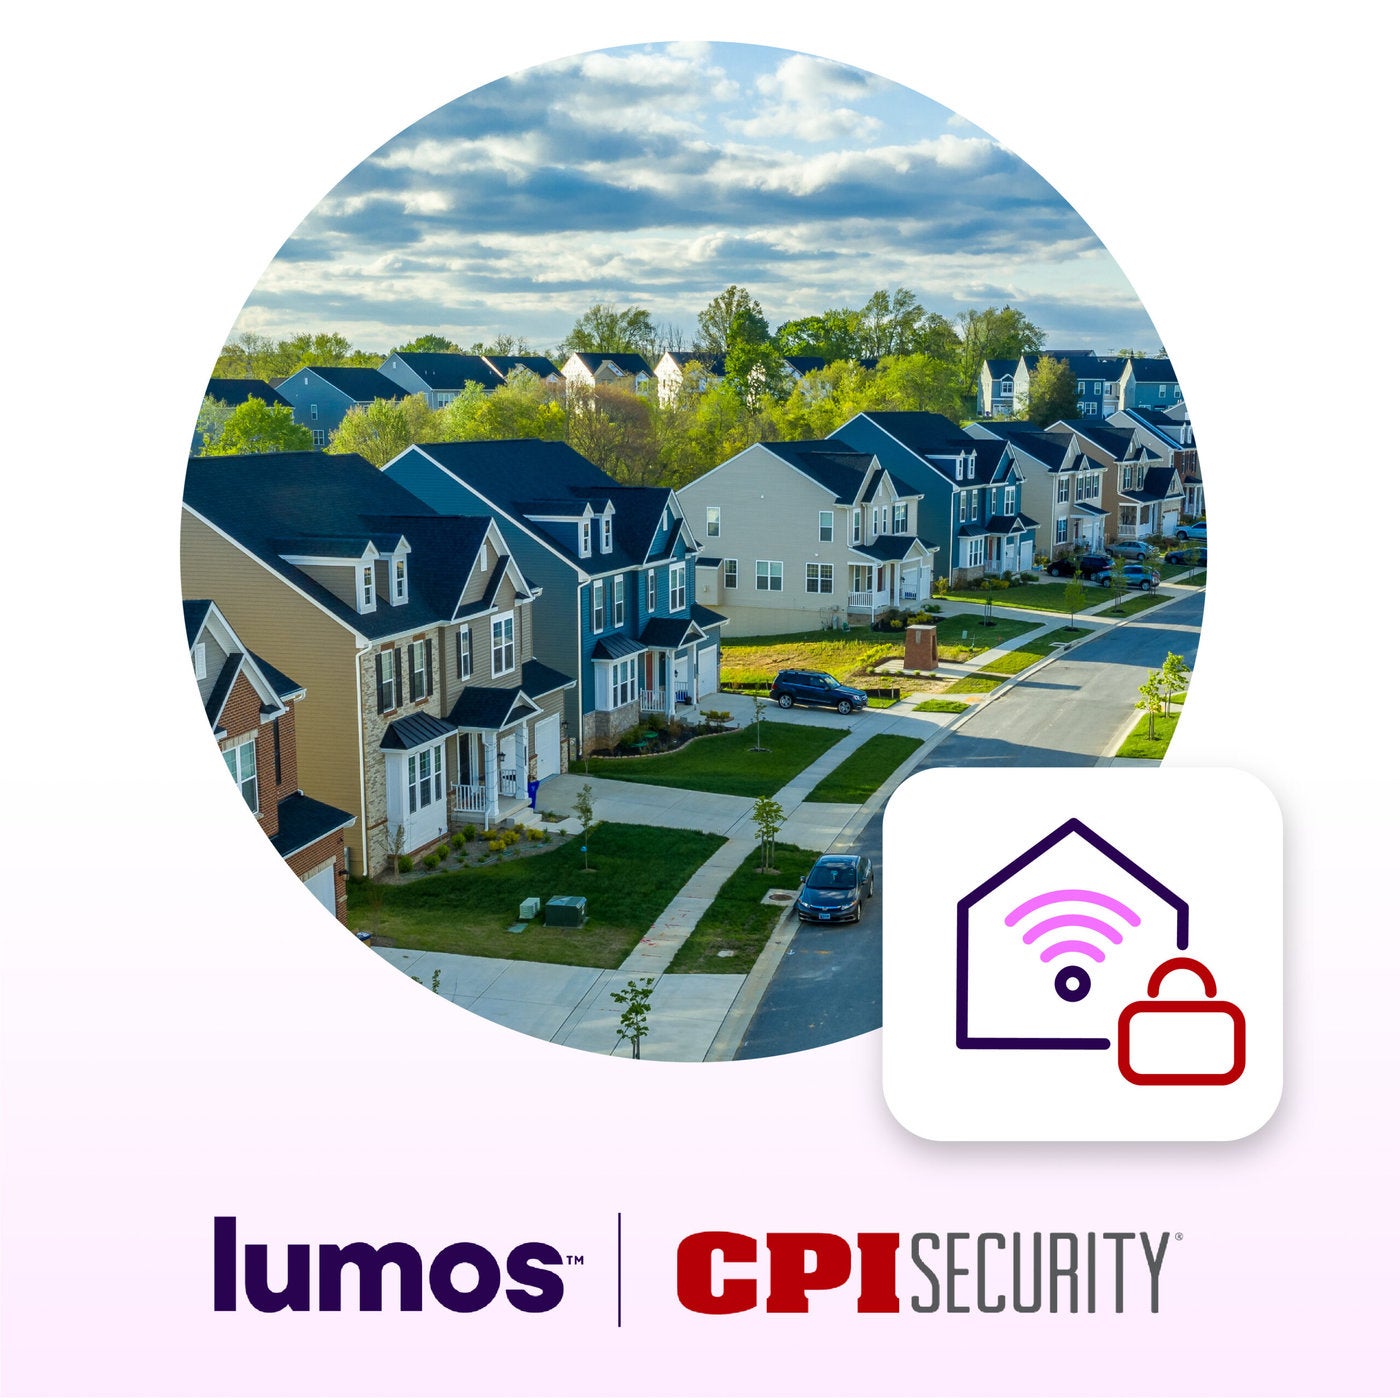 Lumos and CPI Security Announce Strategic Partnership to Better Equip Home Security Systems with Ultra-Fast Fiber Internet 